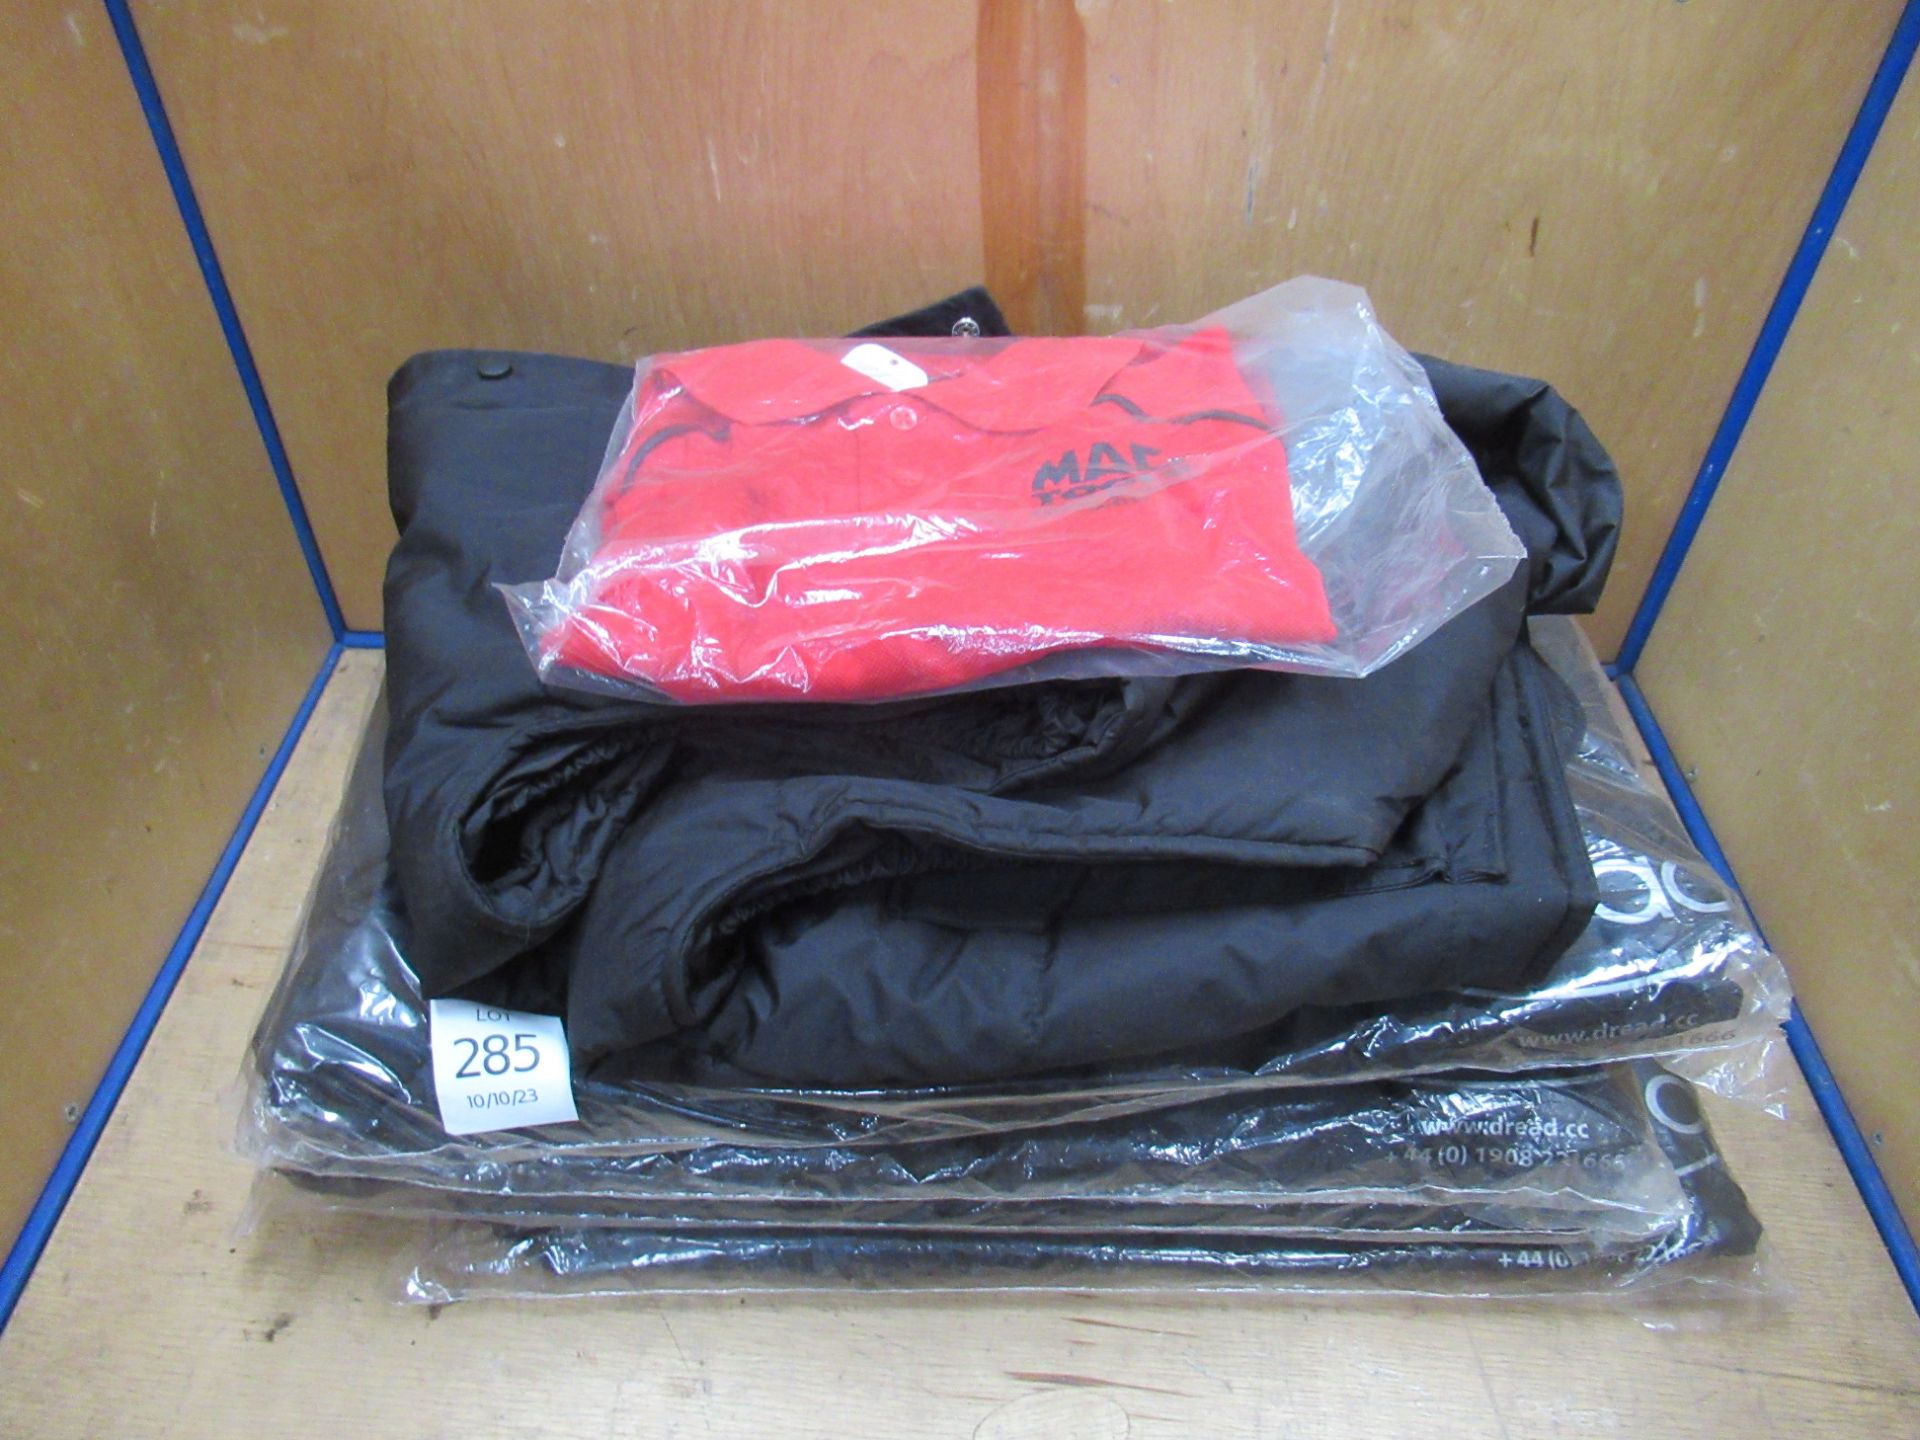 5x MAC Tools Body Warmers (4x large, 1x medium) and a Polo-Shirt (size small)